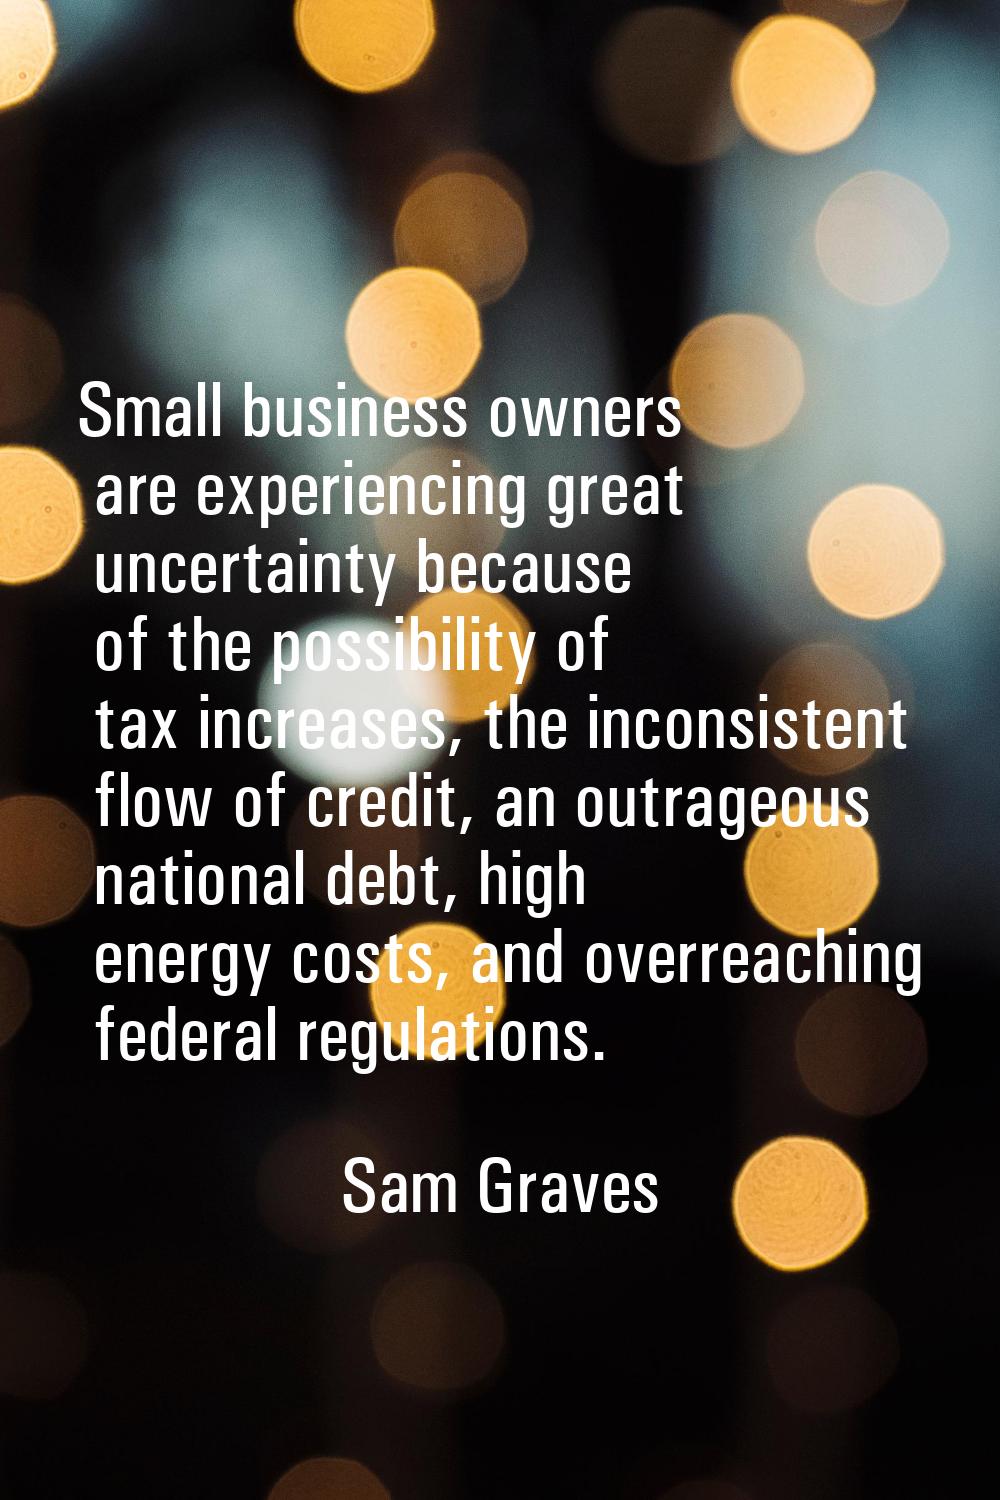 Small business owners are experiencing great uncertainty because of the possibility of tax increase